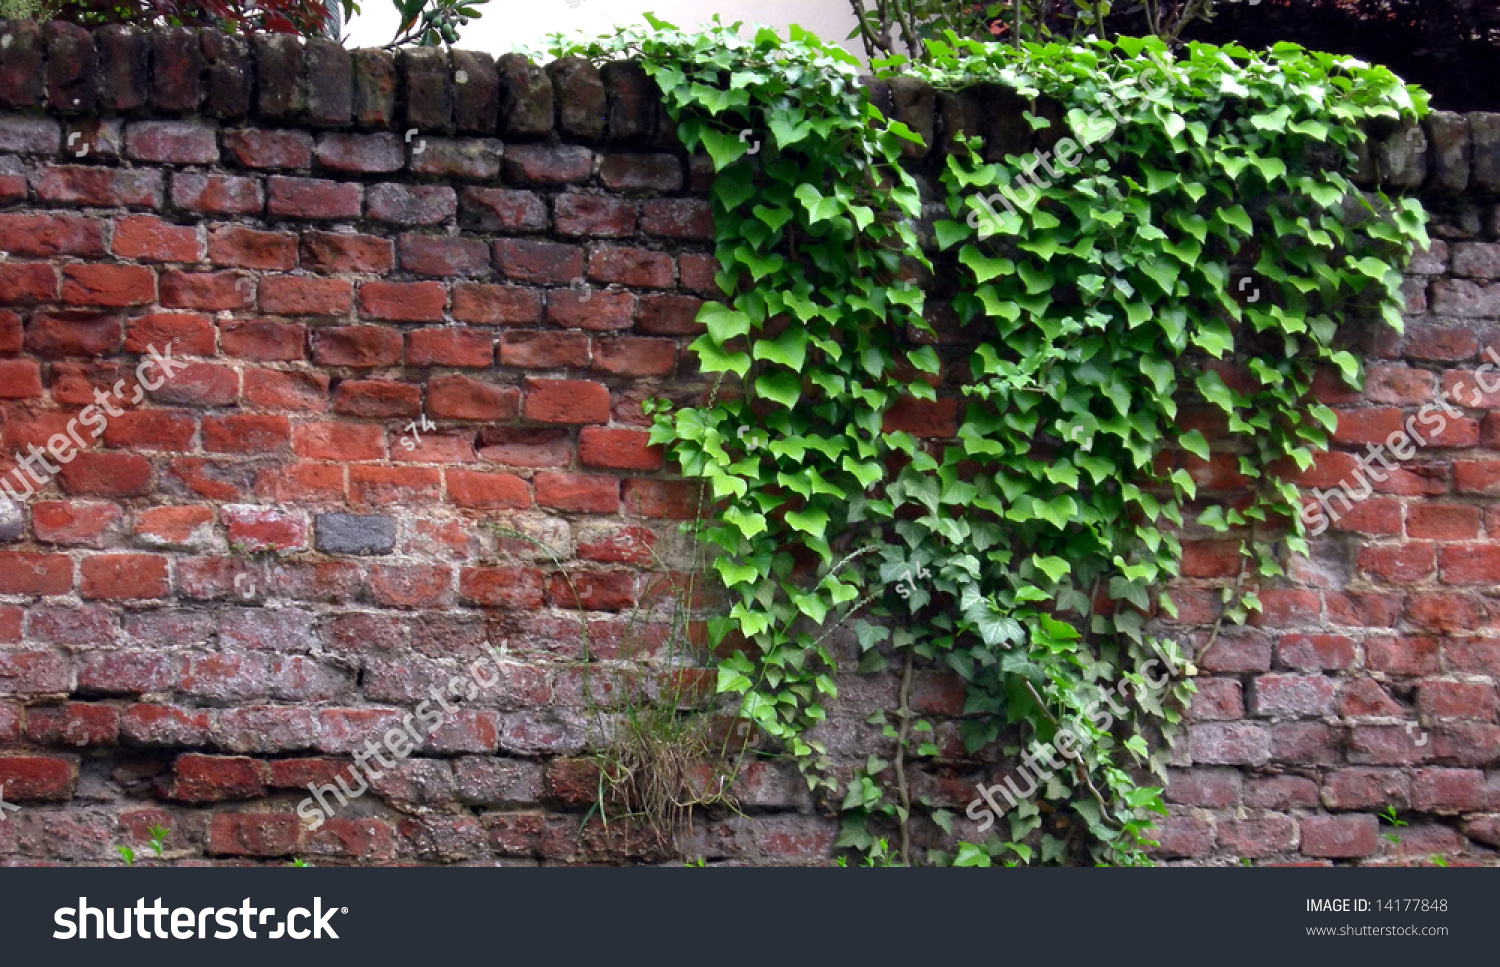 Ivy On An Old Brick Wall Stock Photo 14177848 : Shutterstock